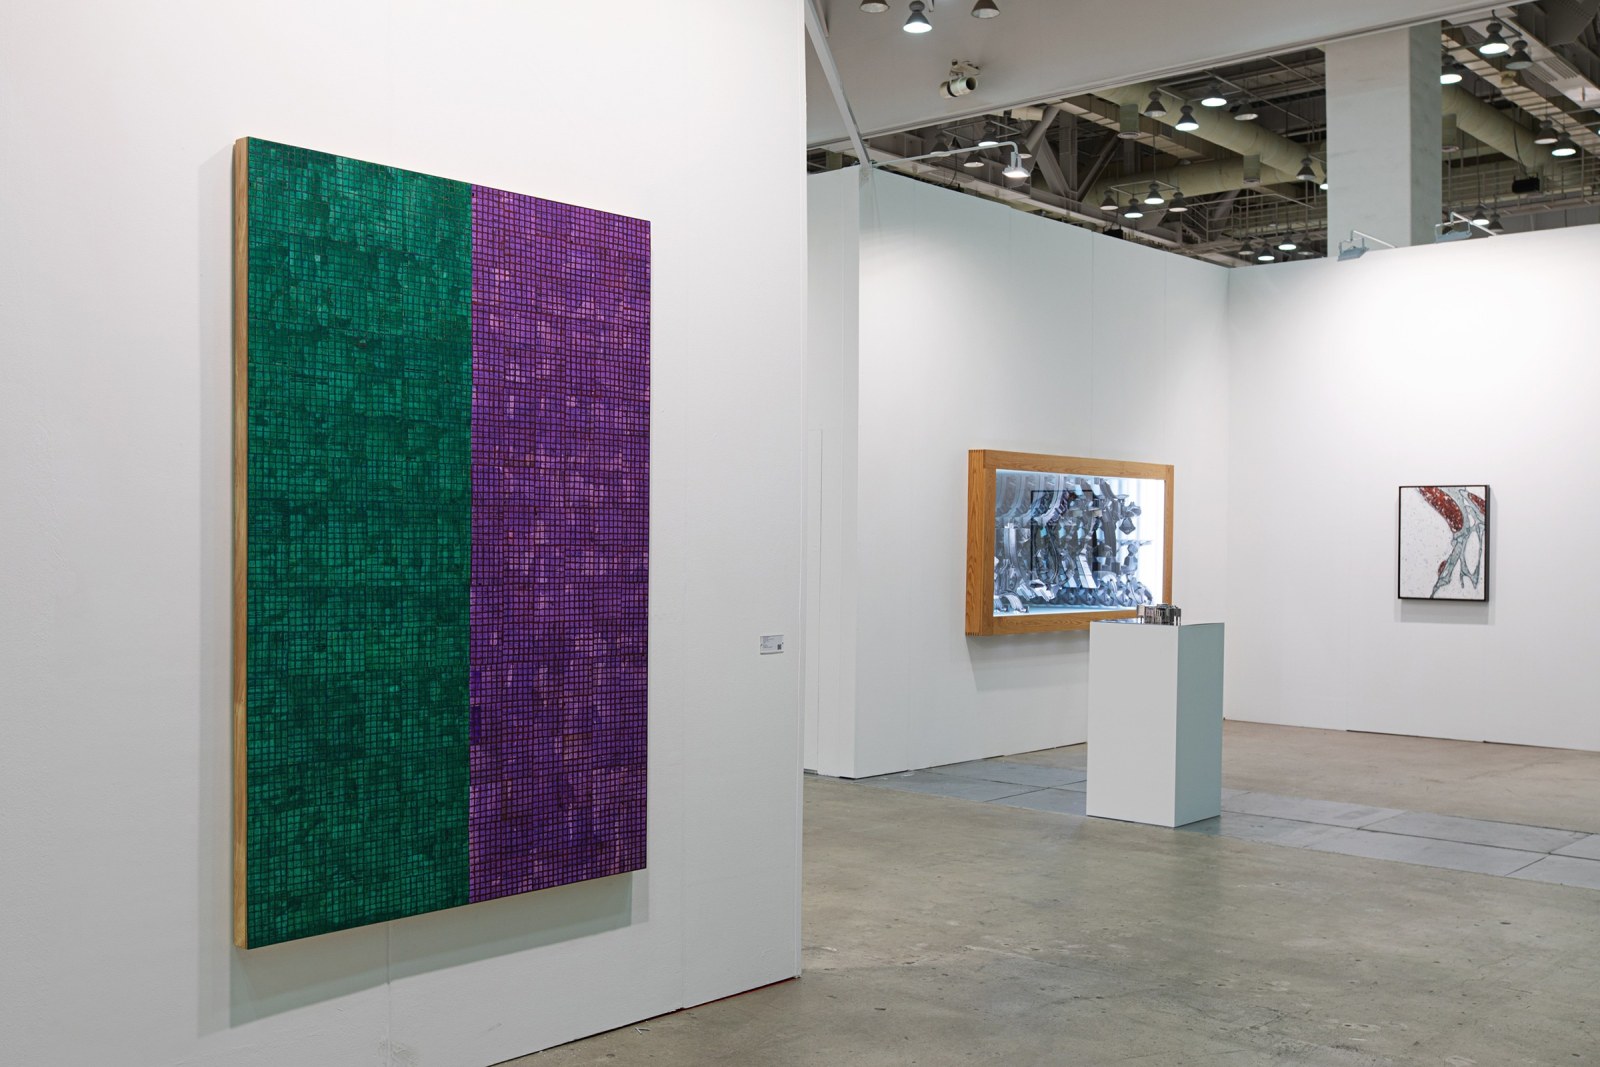 Fifth installation view of Lehmann Maupin's booth at Art Busan &amp; design 2020